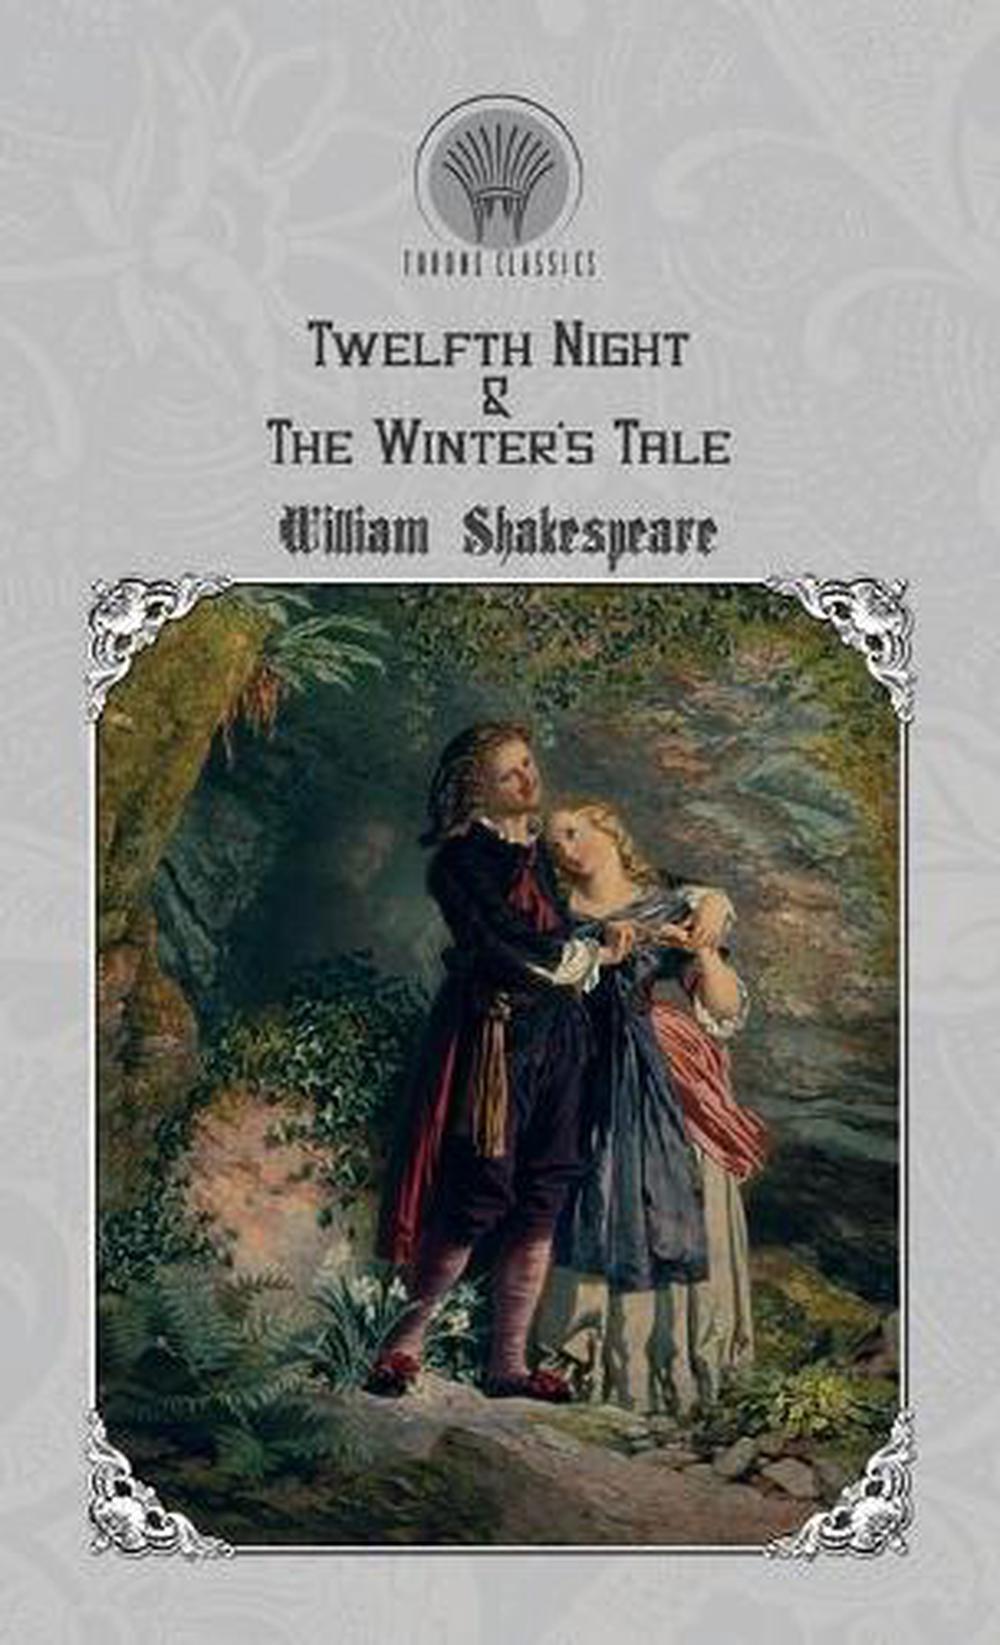 Download Twelfth Night & The Winter's Tale by William Shakespeare ...